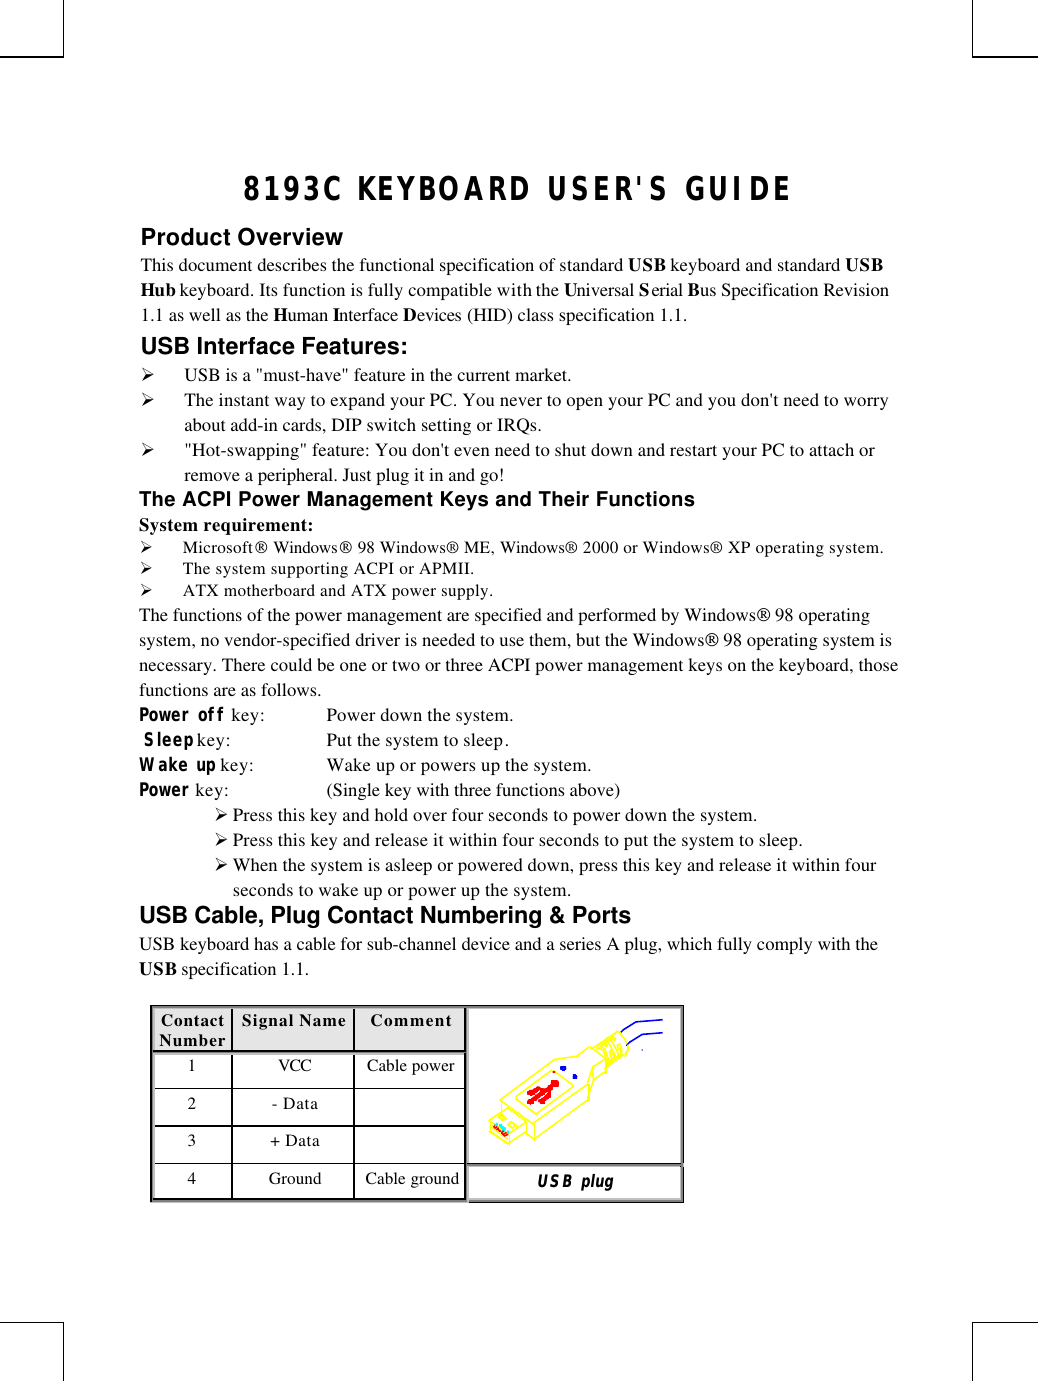 8193C KEYBOARD USER&apos;S GUIDEProduct OverviewThis document describes the functional specification of standard USB keyboard and standard USBHub keyboard. Its function is fully compatible with the Universal Serial Bus Specification Revision1.1 as well as the Human Interface Devices (HID) class specification 1.1.USB Interface Features:Ø USB is a &quot;must-have&quot; feature in the current market.Ø The instant way to expand your PC. You never to open your PC and you don&apos;t need to worryabout add-in cards, DIP switch setting or IRQs.Ø &quot;Hot-swapping&quot; feature: You don&apos;t even need to shut down and restart your PC to attach orremove a peripheral. Just plug it in and go!The ACPI Power Management Keys and Their FunctionsSystem requirement:Ø Microsoft Windows 98 Windows®  ME, Windows®  2000 or Windows®  XP operating system.Ø The system supporting ACPI or APMII.Ø ATX motherboard and ATX power supply.The functions of the power management are specified and performed by Windows 98 operatingsystem, no vendor-specified driver is needed to use them, but the Windows 98 operating system isnecessary. There could be one or two or three ACPI power management keys on the keyboard, thosefunctions are as follows.Power off key: Power down the system. Sleep key: Put the system to sleep.Wake up key: Wake up or powers up the system.Power key: (Single key with three functions above)Ø Press this key and hold over four seconds to power down the system.Ø Press this key and release it within four seconds to put the system to sleep.Ø When the system is asleep or powered down, press this key and release it within fourseconds to wake up or power up the system.USB Cable, Plug Contact Numbering &amp; PortsUSB keyboard has a cable for sub-channel device and a series A plug, which fully comply with theUSB specification 1.1.ContactNumber Signal Name Comment1VCC Cable power2- Data3+ Data 4Ground Cable ground UUSSBB  pplluugg